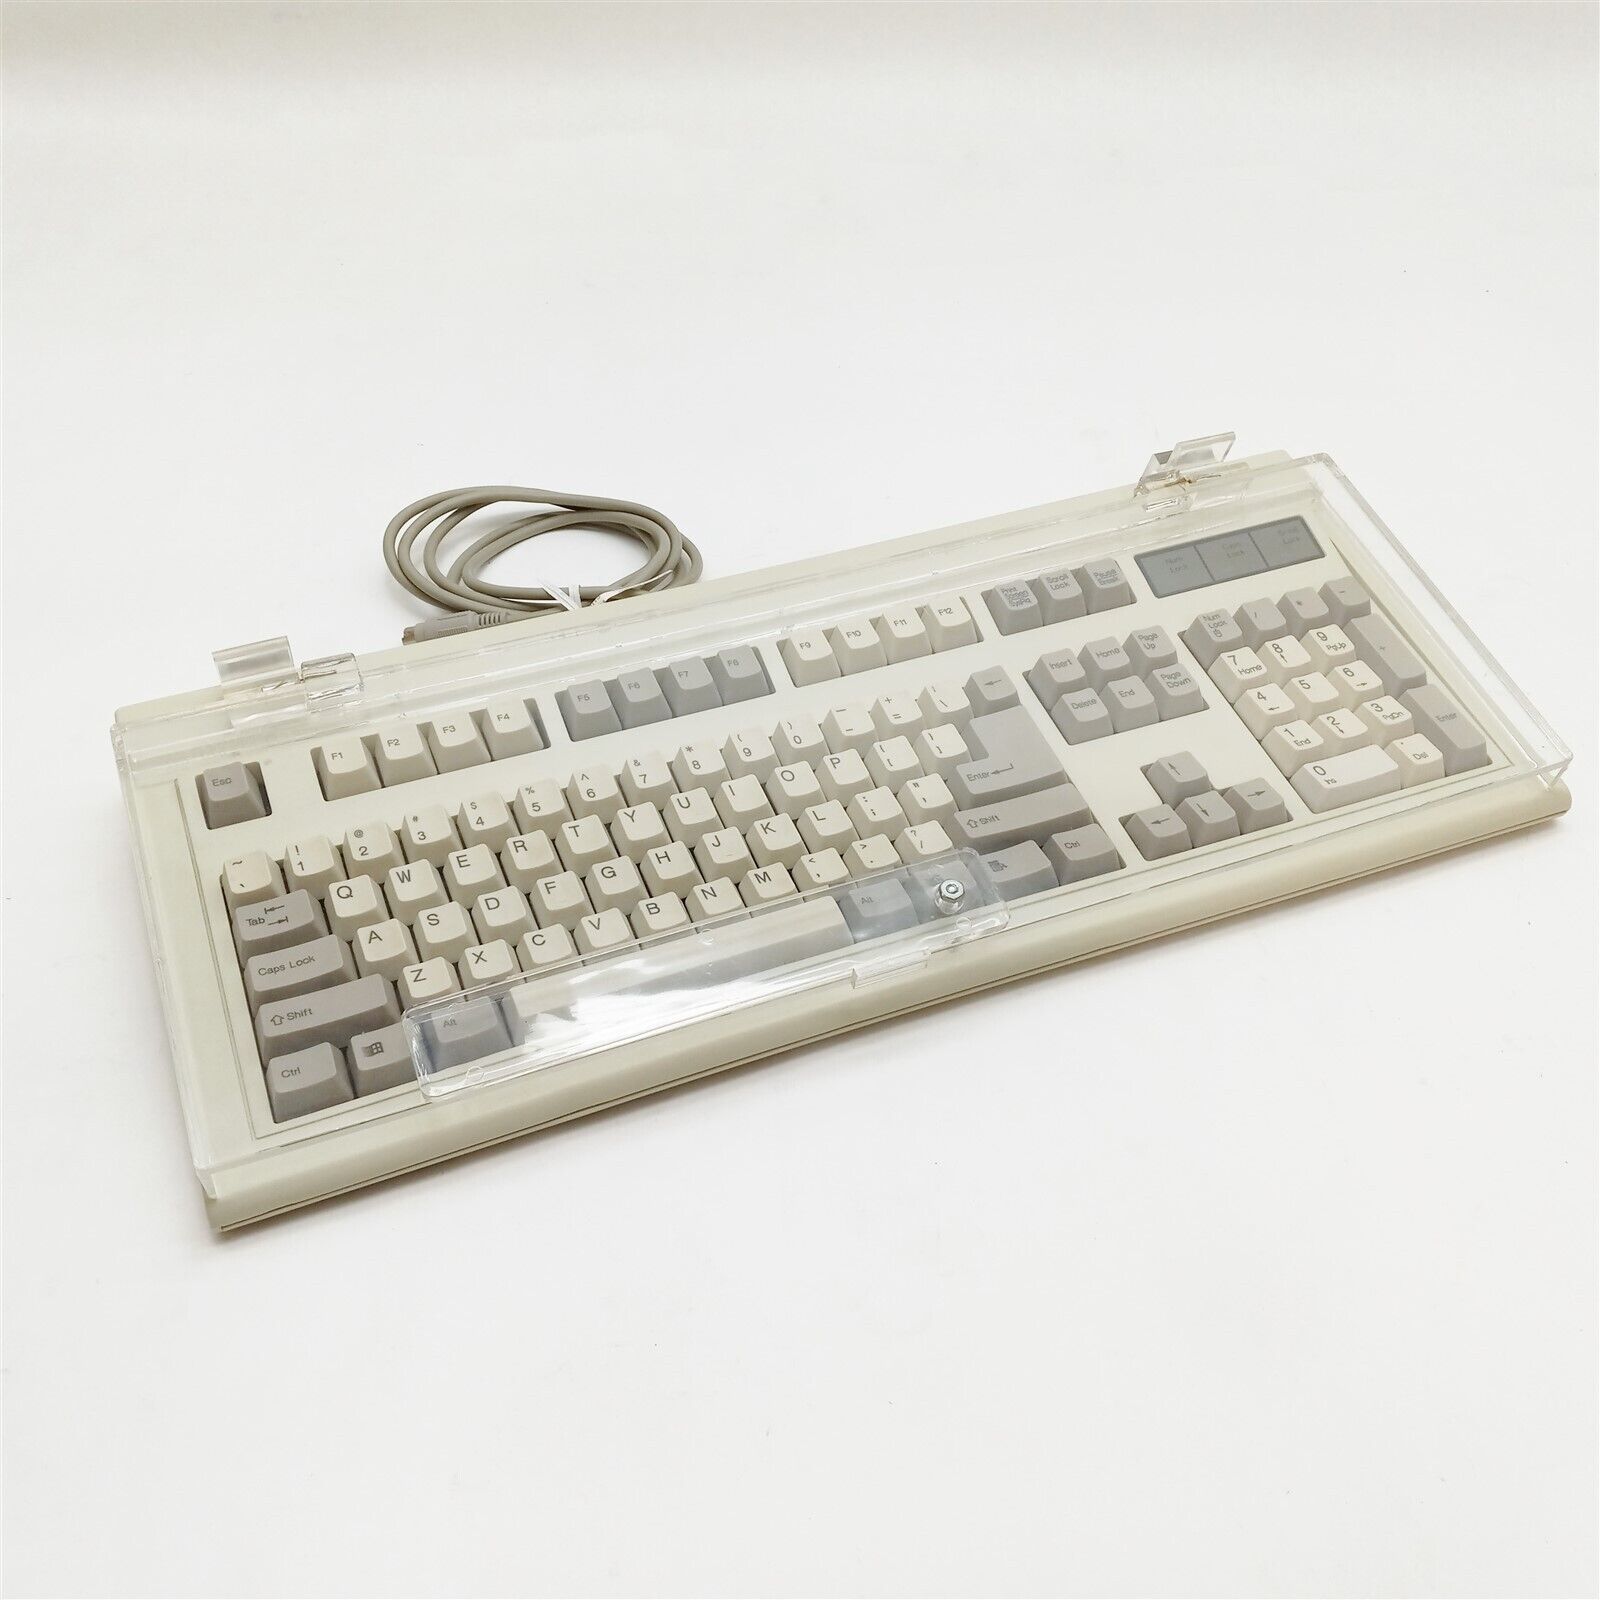 Chicony KB-5981 Vintage Retro Windows Mechanical Computer Clicky PS/2 Keyboard